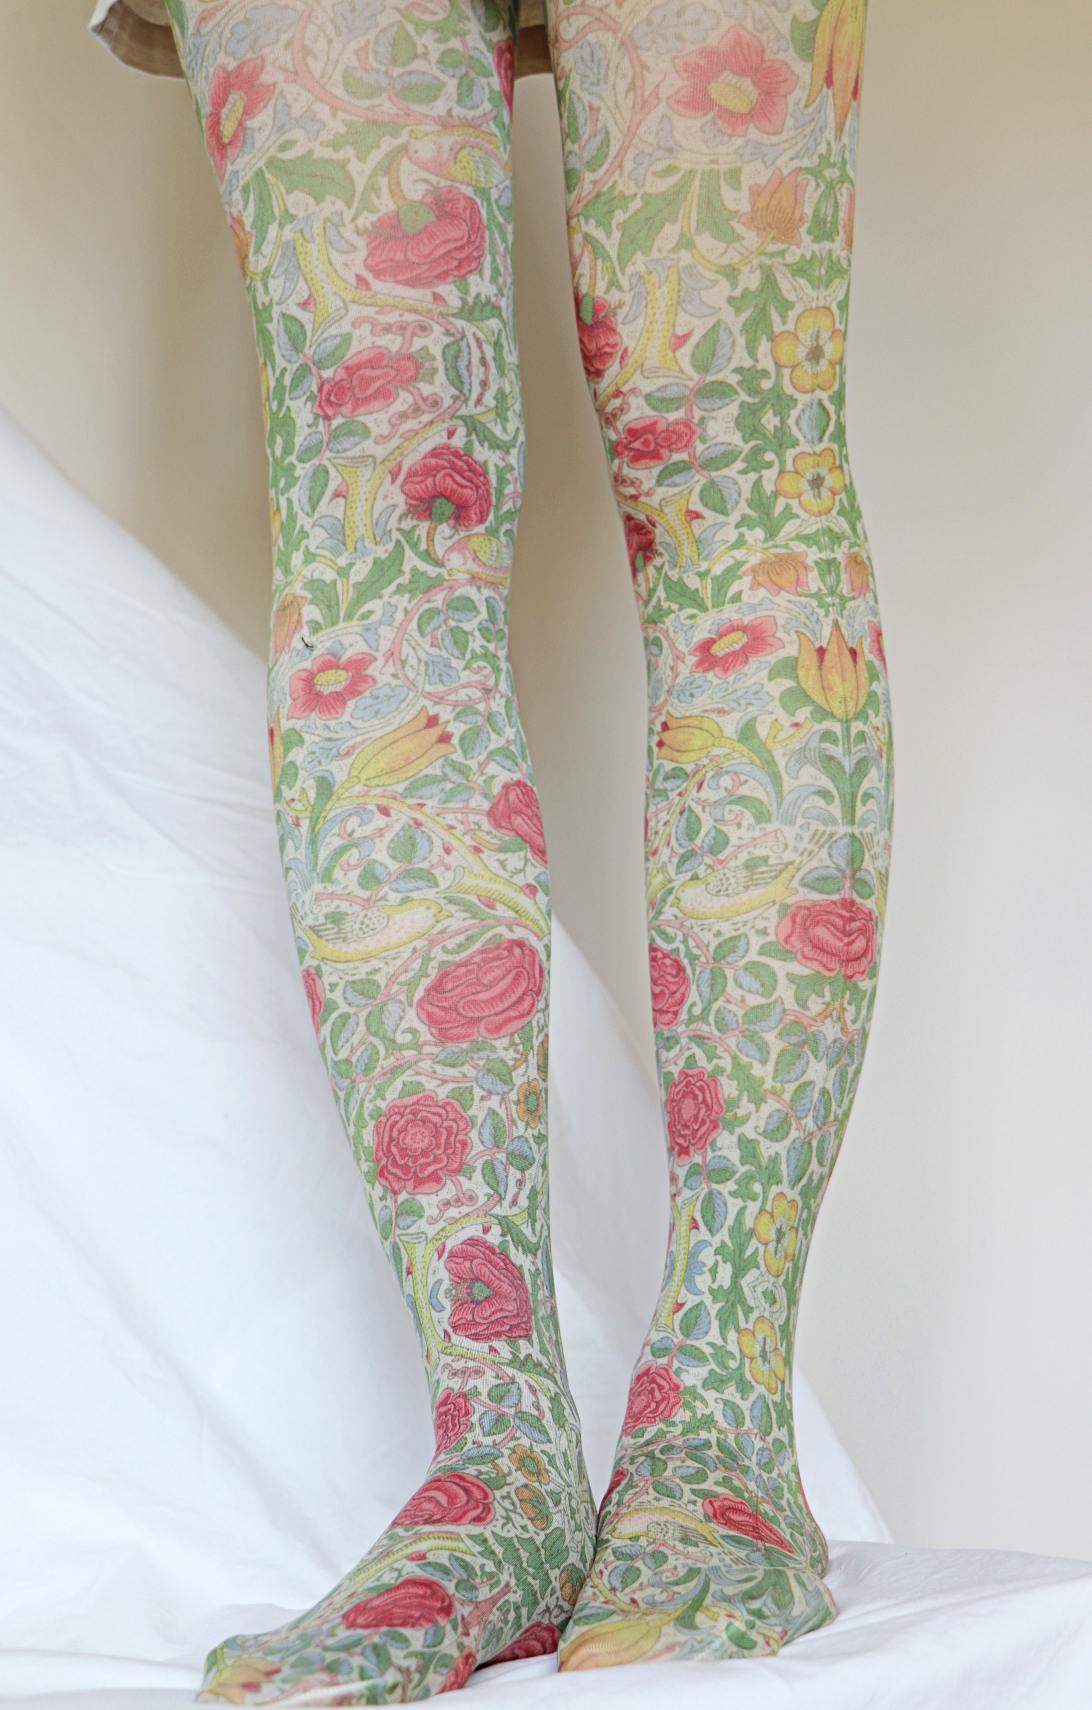 Tights called Rose from the William Morris collection of the TABBISOCKS brand, with an overall design of red-yellow roses, antique green in color.